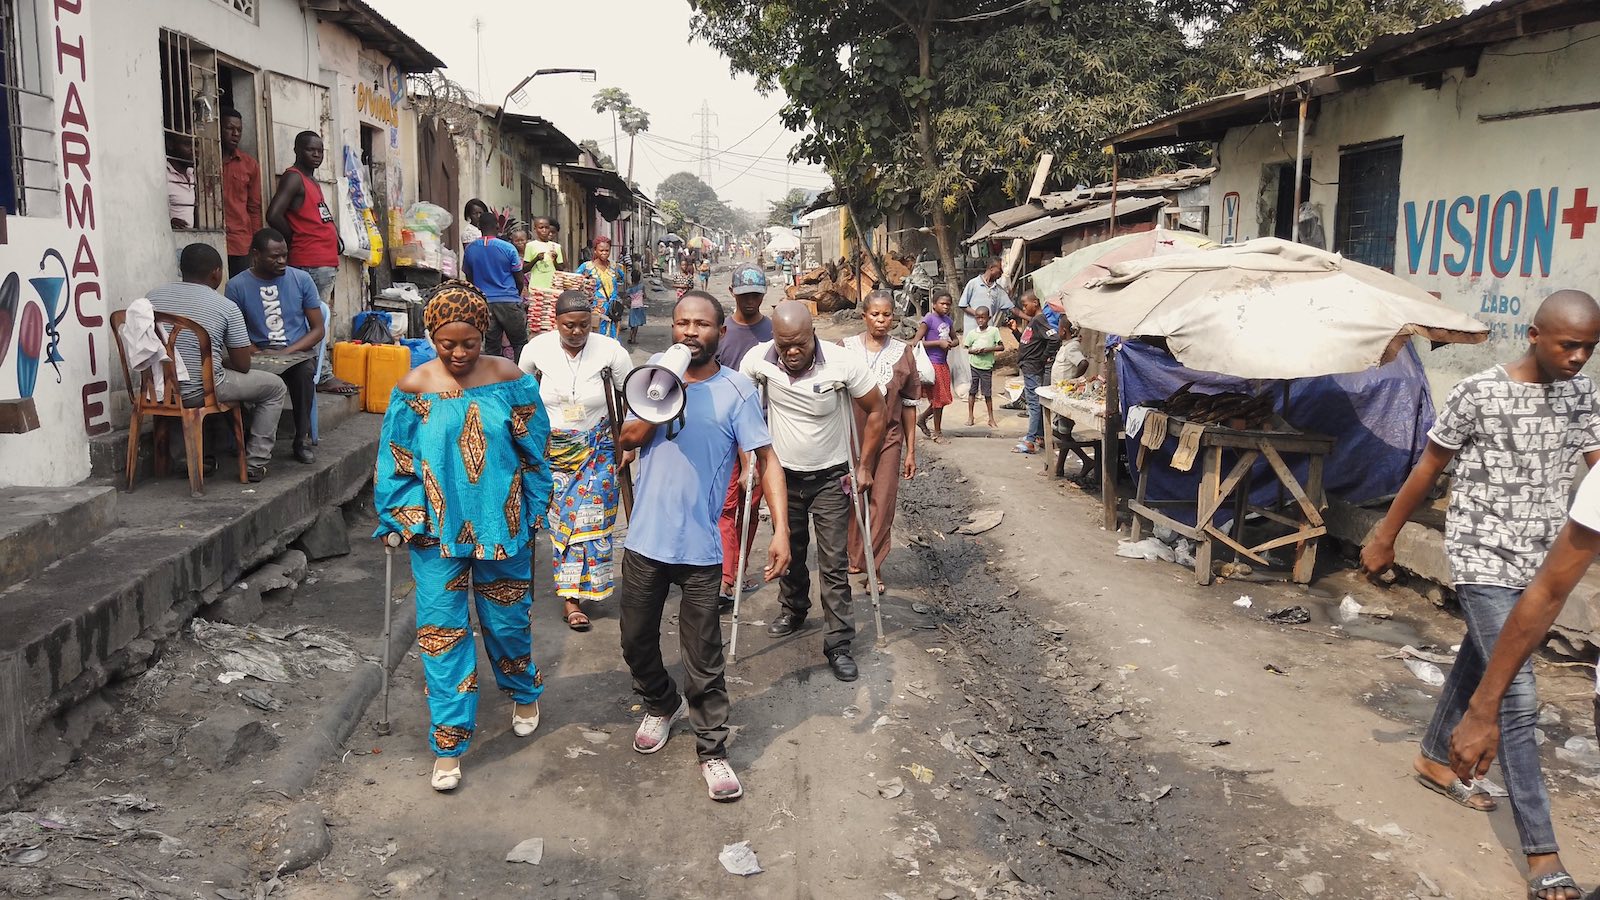 A group of people, one holding a megaphone and others in crutches, walk down a village street in Kinshasa.